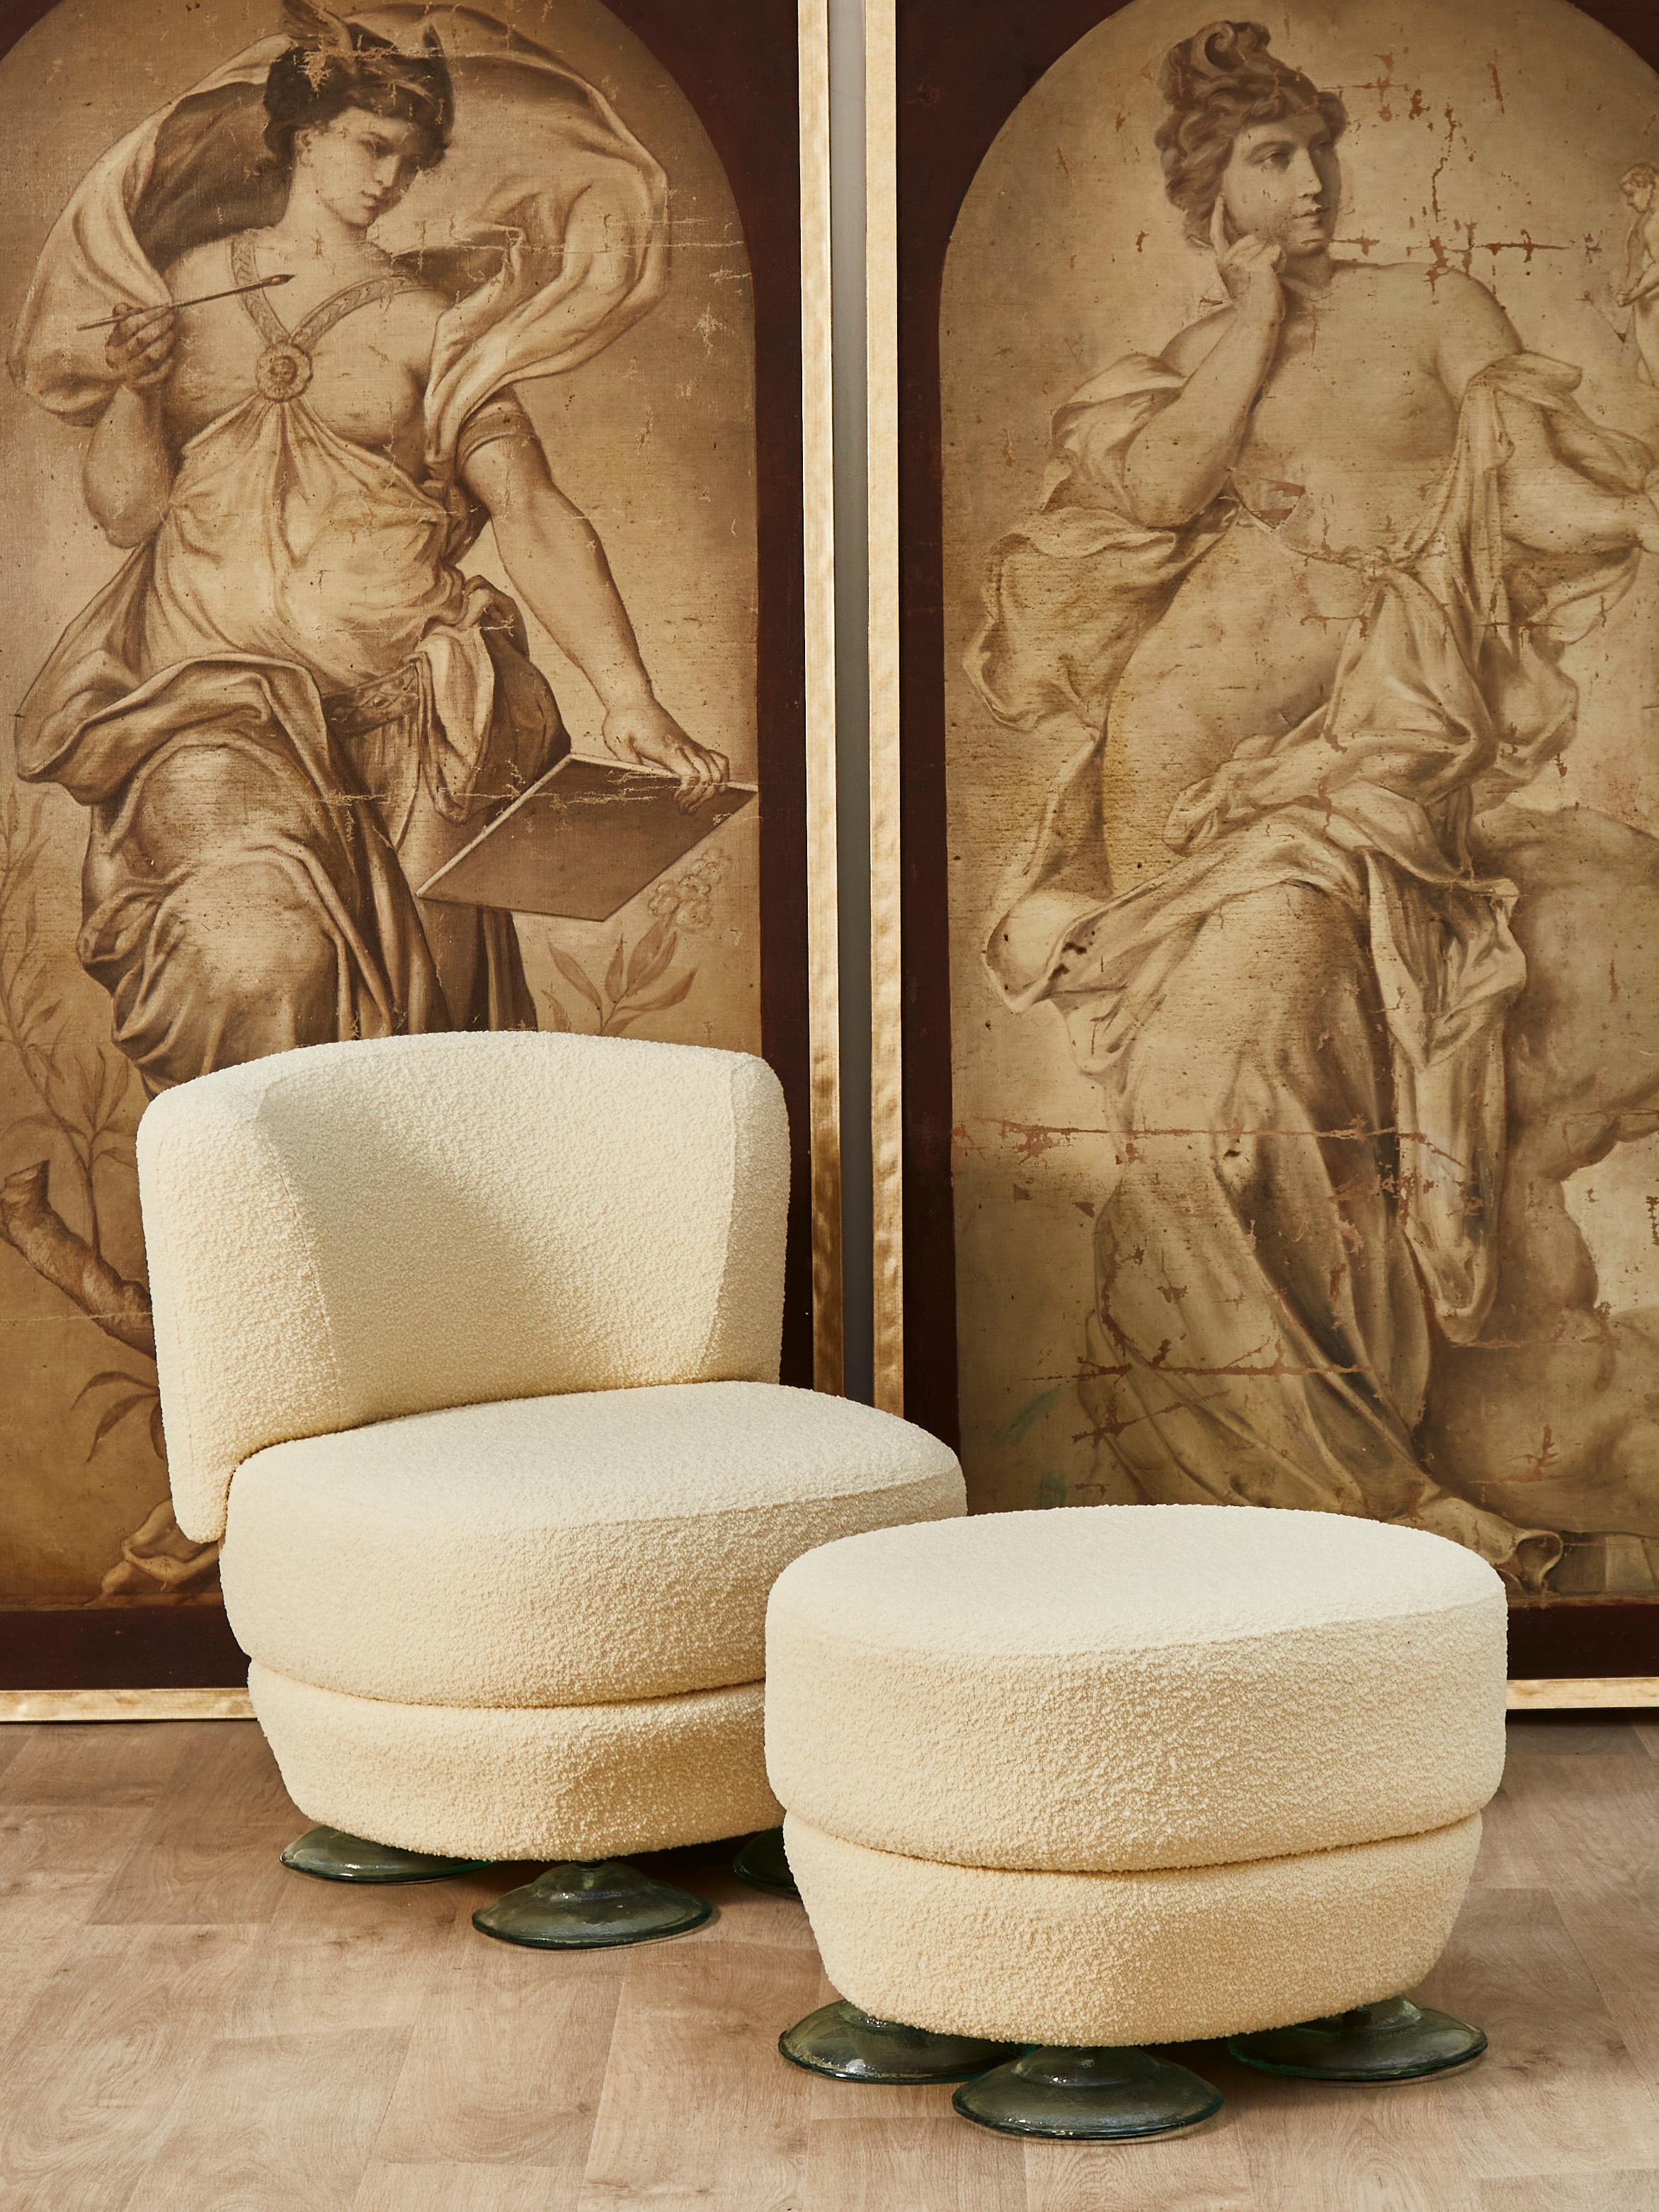 Vintage armchairs with one stool, designed by André Putman for the Hotel Pershing Hall Paris. Glass circular feet complete the unique design, circa 2001,
France.

Dimension of the stool: 60 x 41 x H 52 cm.